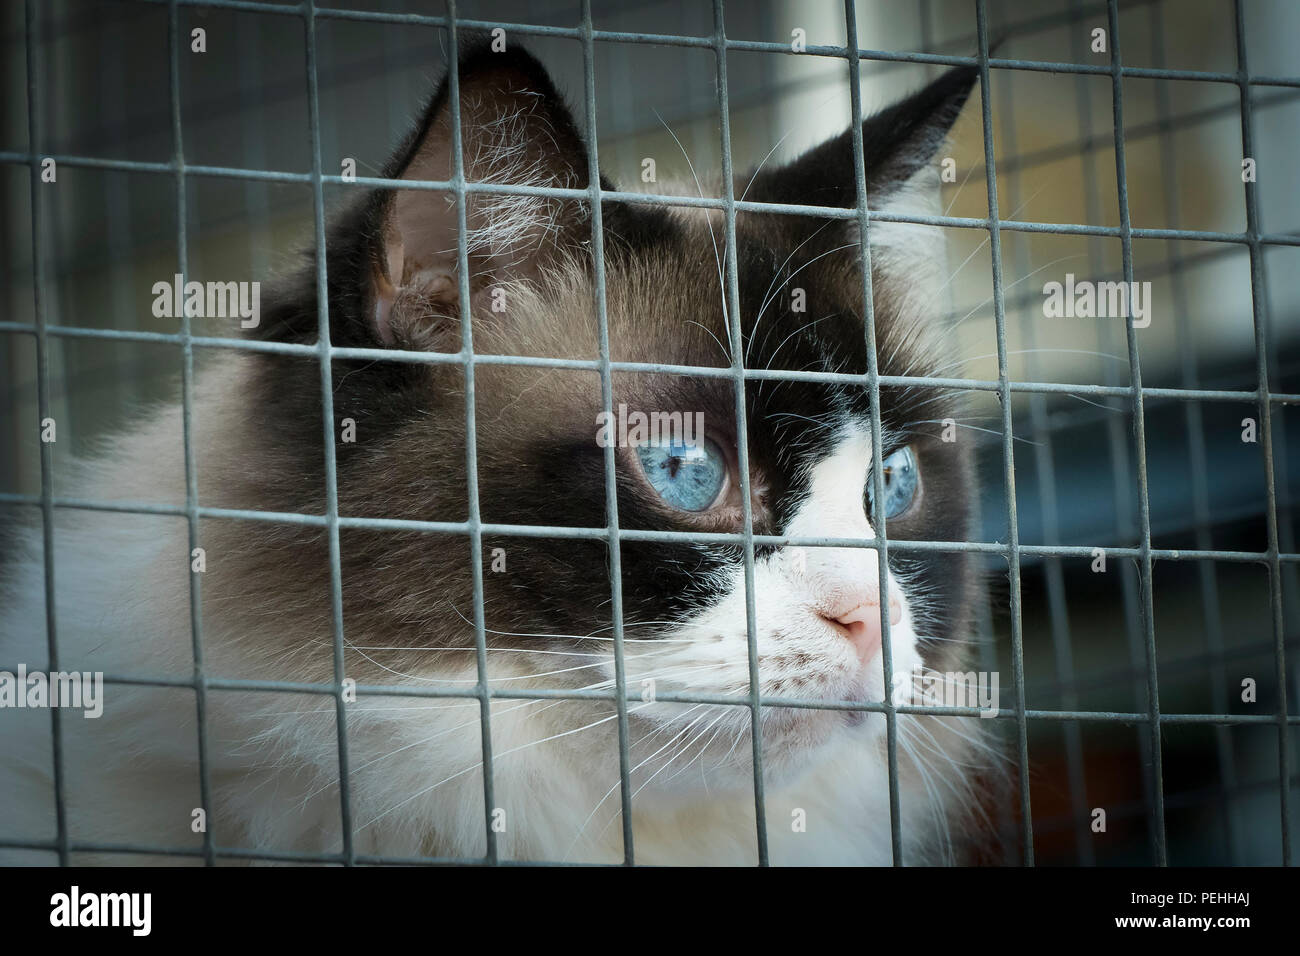 Head of an alert Ragdol cat viewing the outside world brom the security of spacious cat run Stock Photo